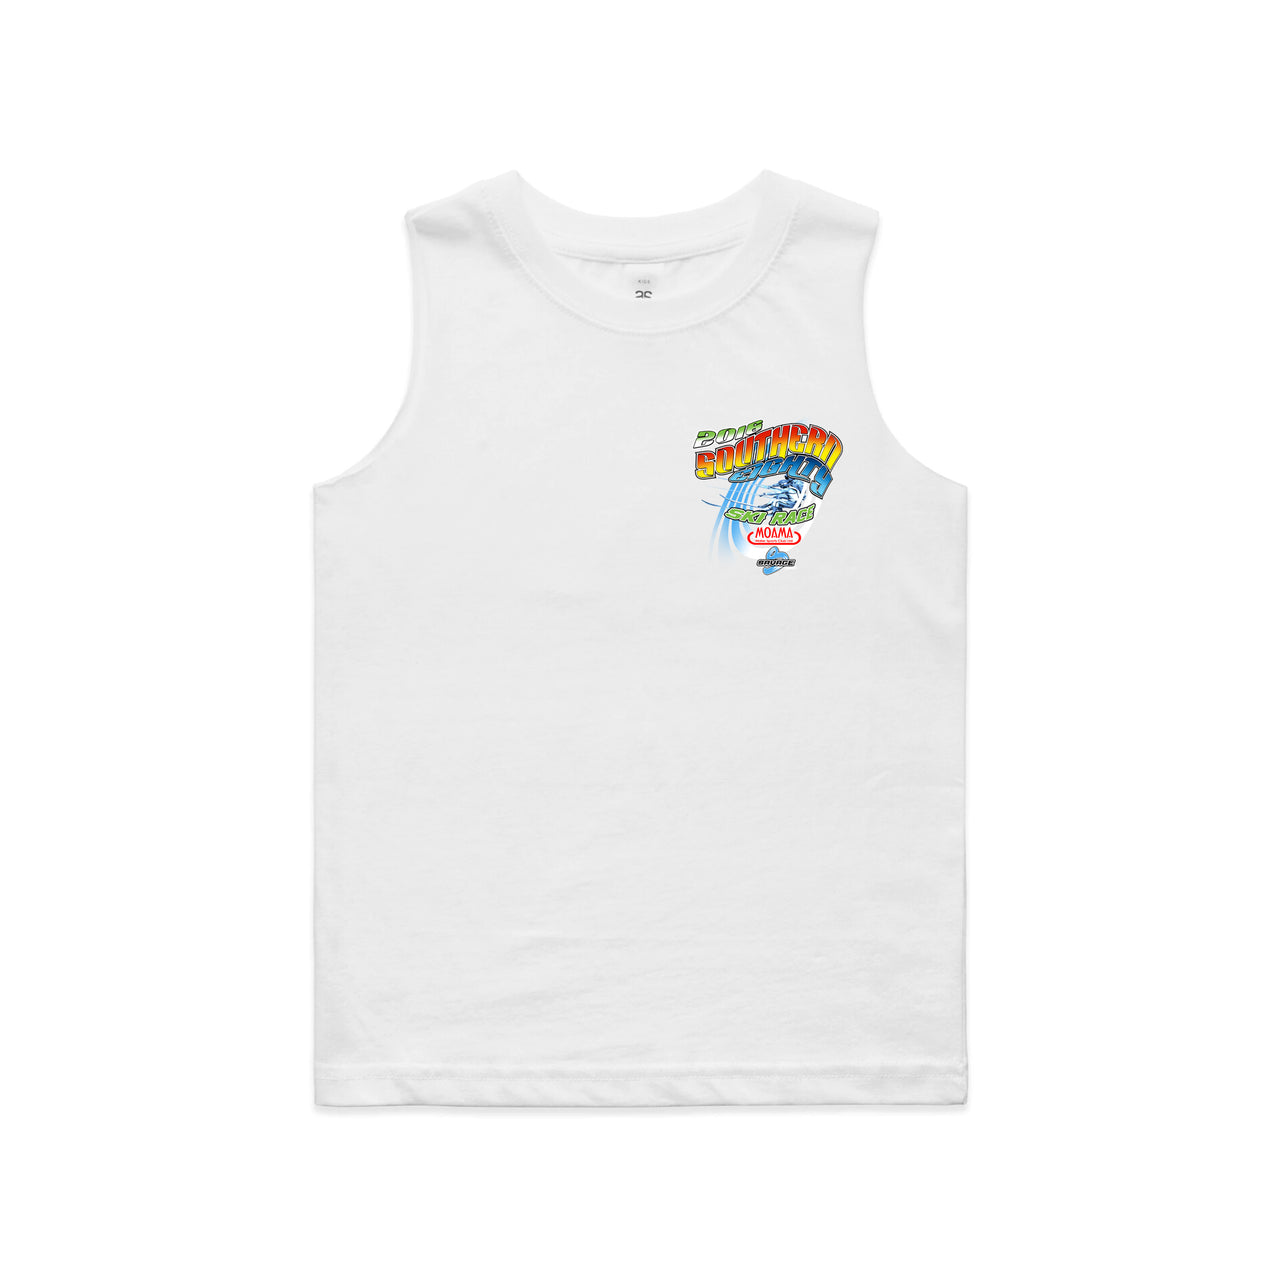 S80 2016 Hellrazor Event Youth/Kids Tank